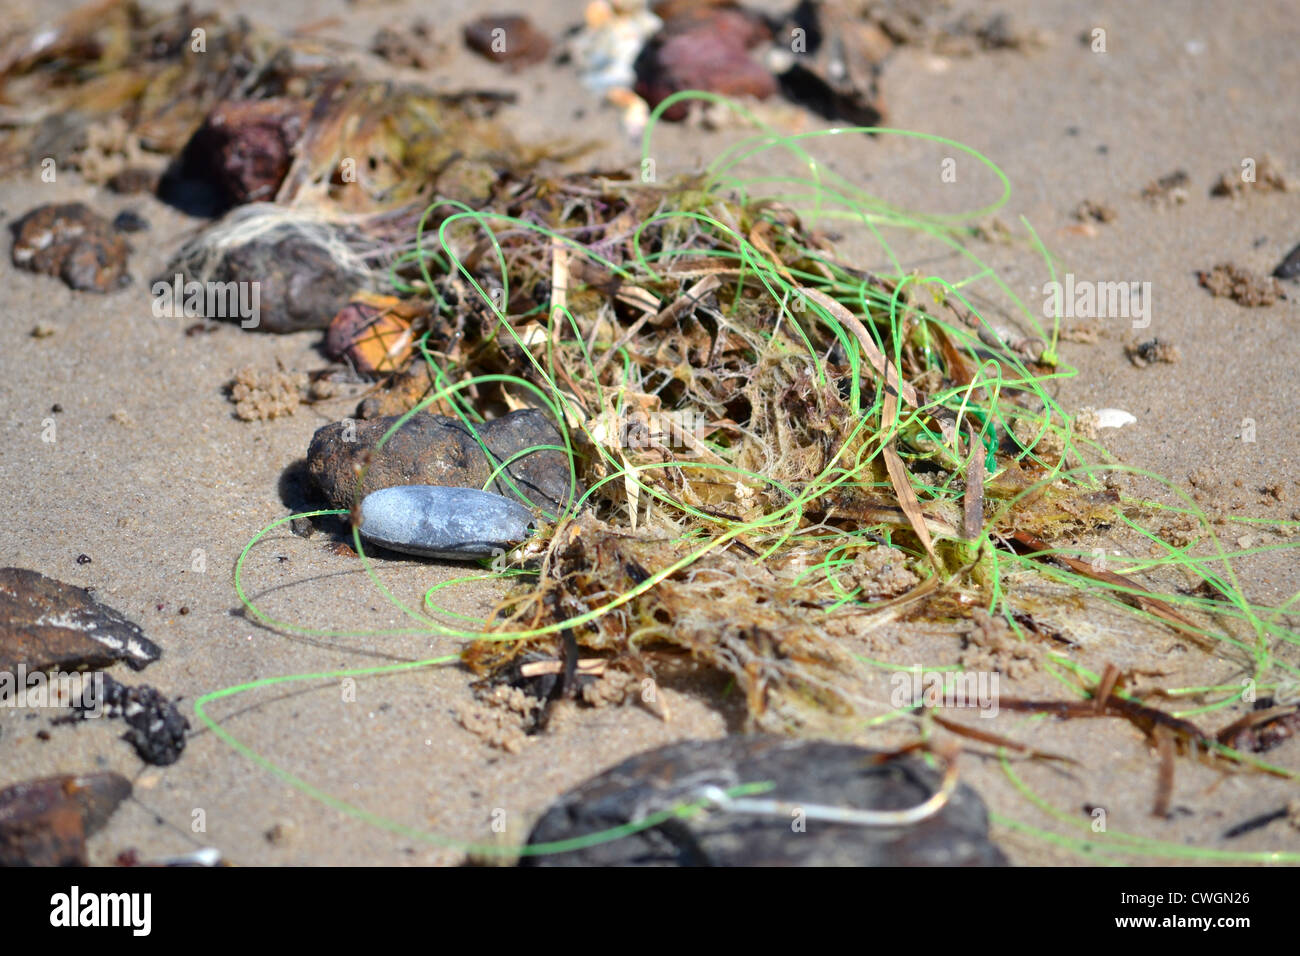 https://c8.alamy.com/comp/CWGN26/discarded-fishing-line-with-hook-and-sinker-washed-up-on-the-beach-CWGN26.jpg